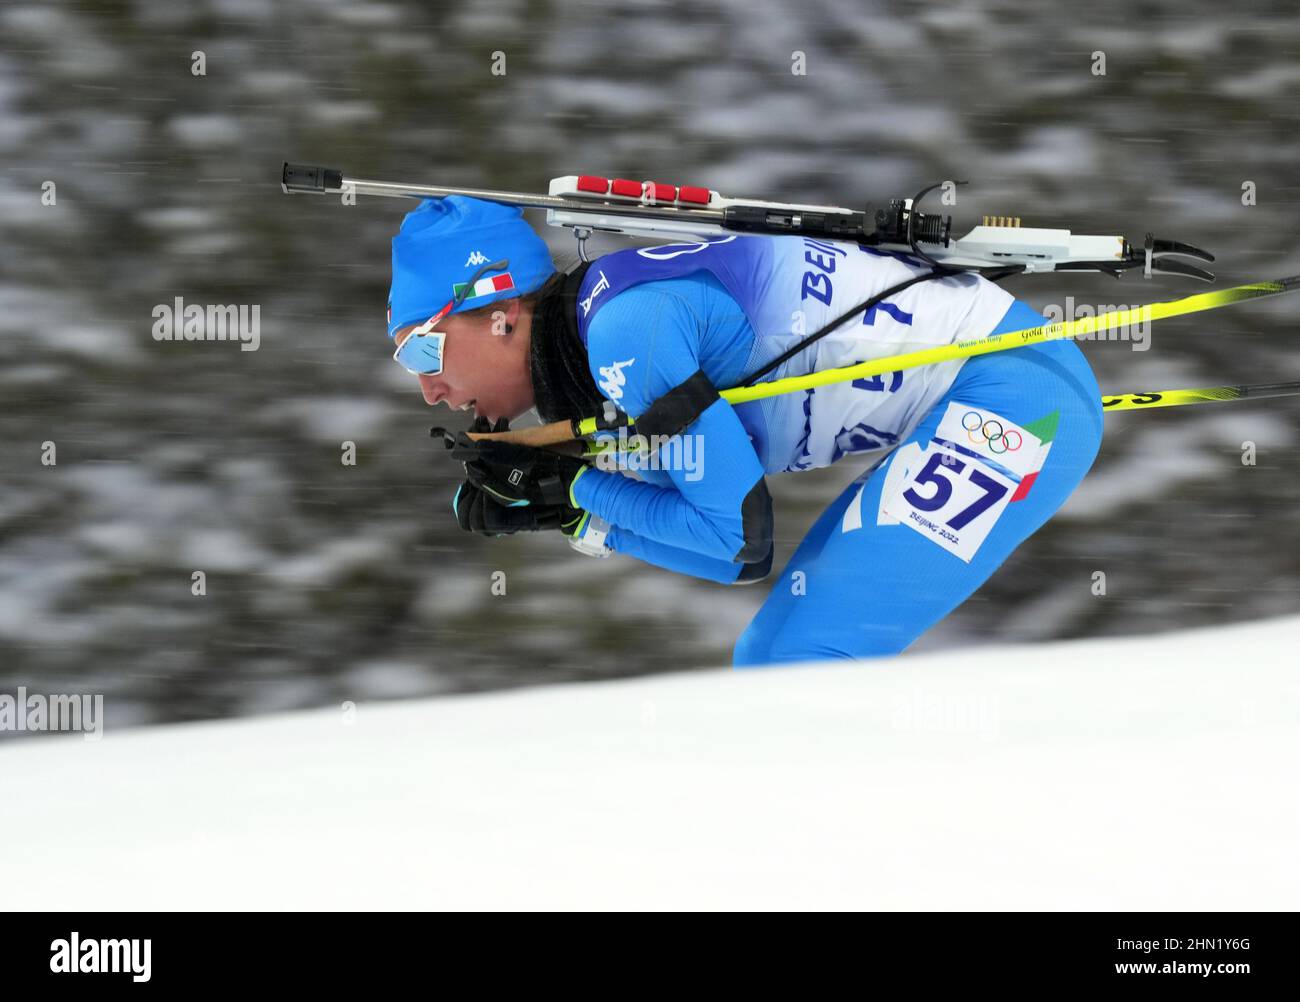 Zhangjiakou, Chinas Hebei Province. 13th Feb, 2022. Samuela Comola of Italy competes during biathlon womens 10km pursuit at National Biathlon Centre in Zhangjiakou, north Chinas Hebei Province, Feb